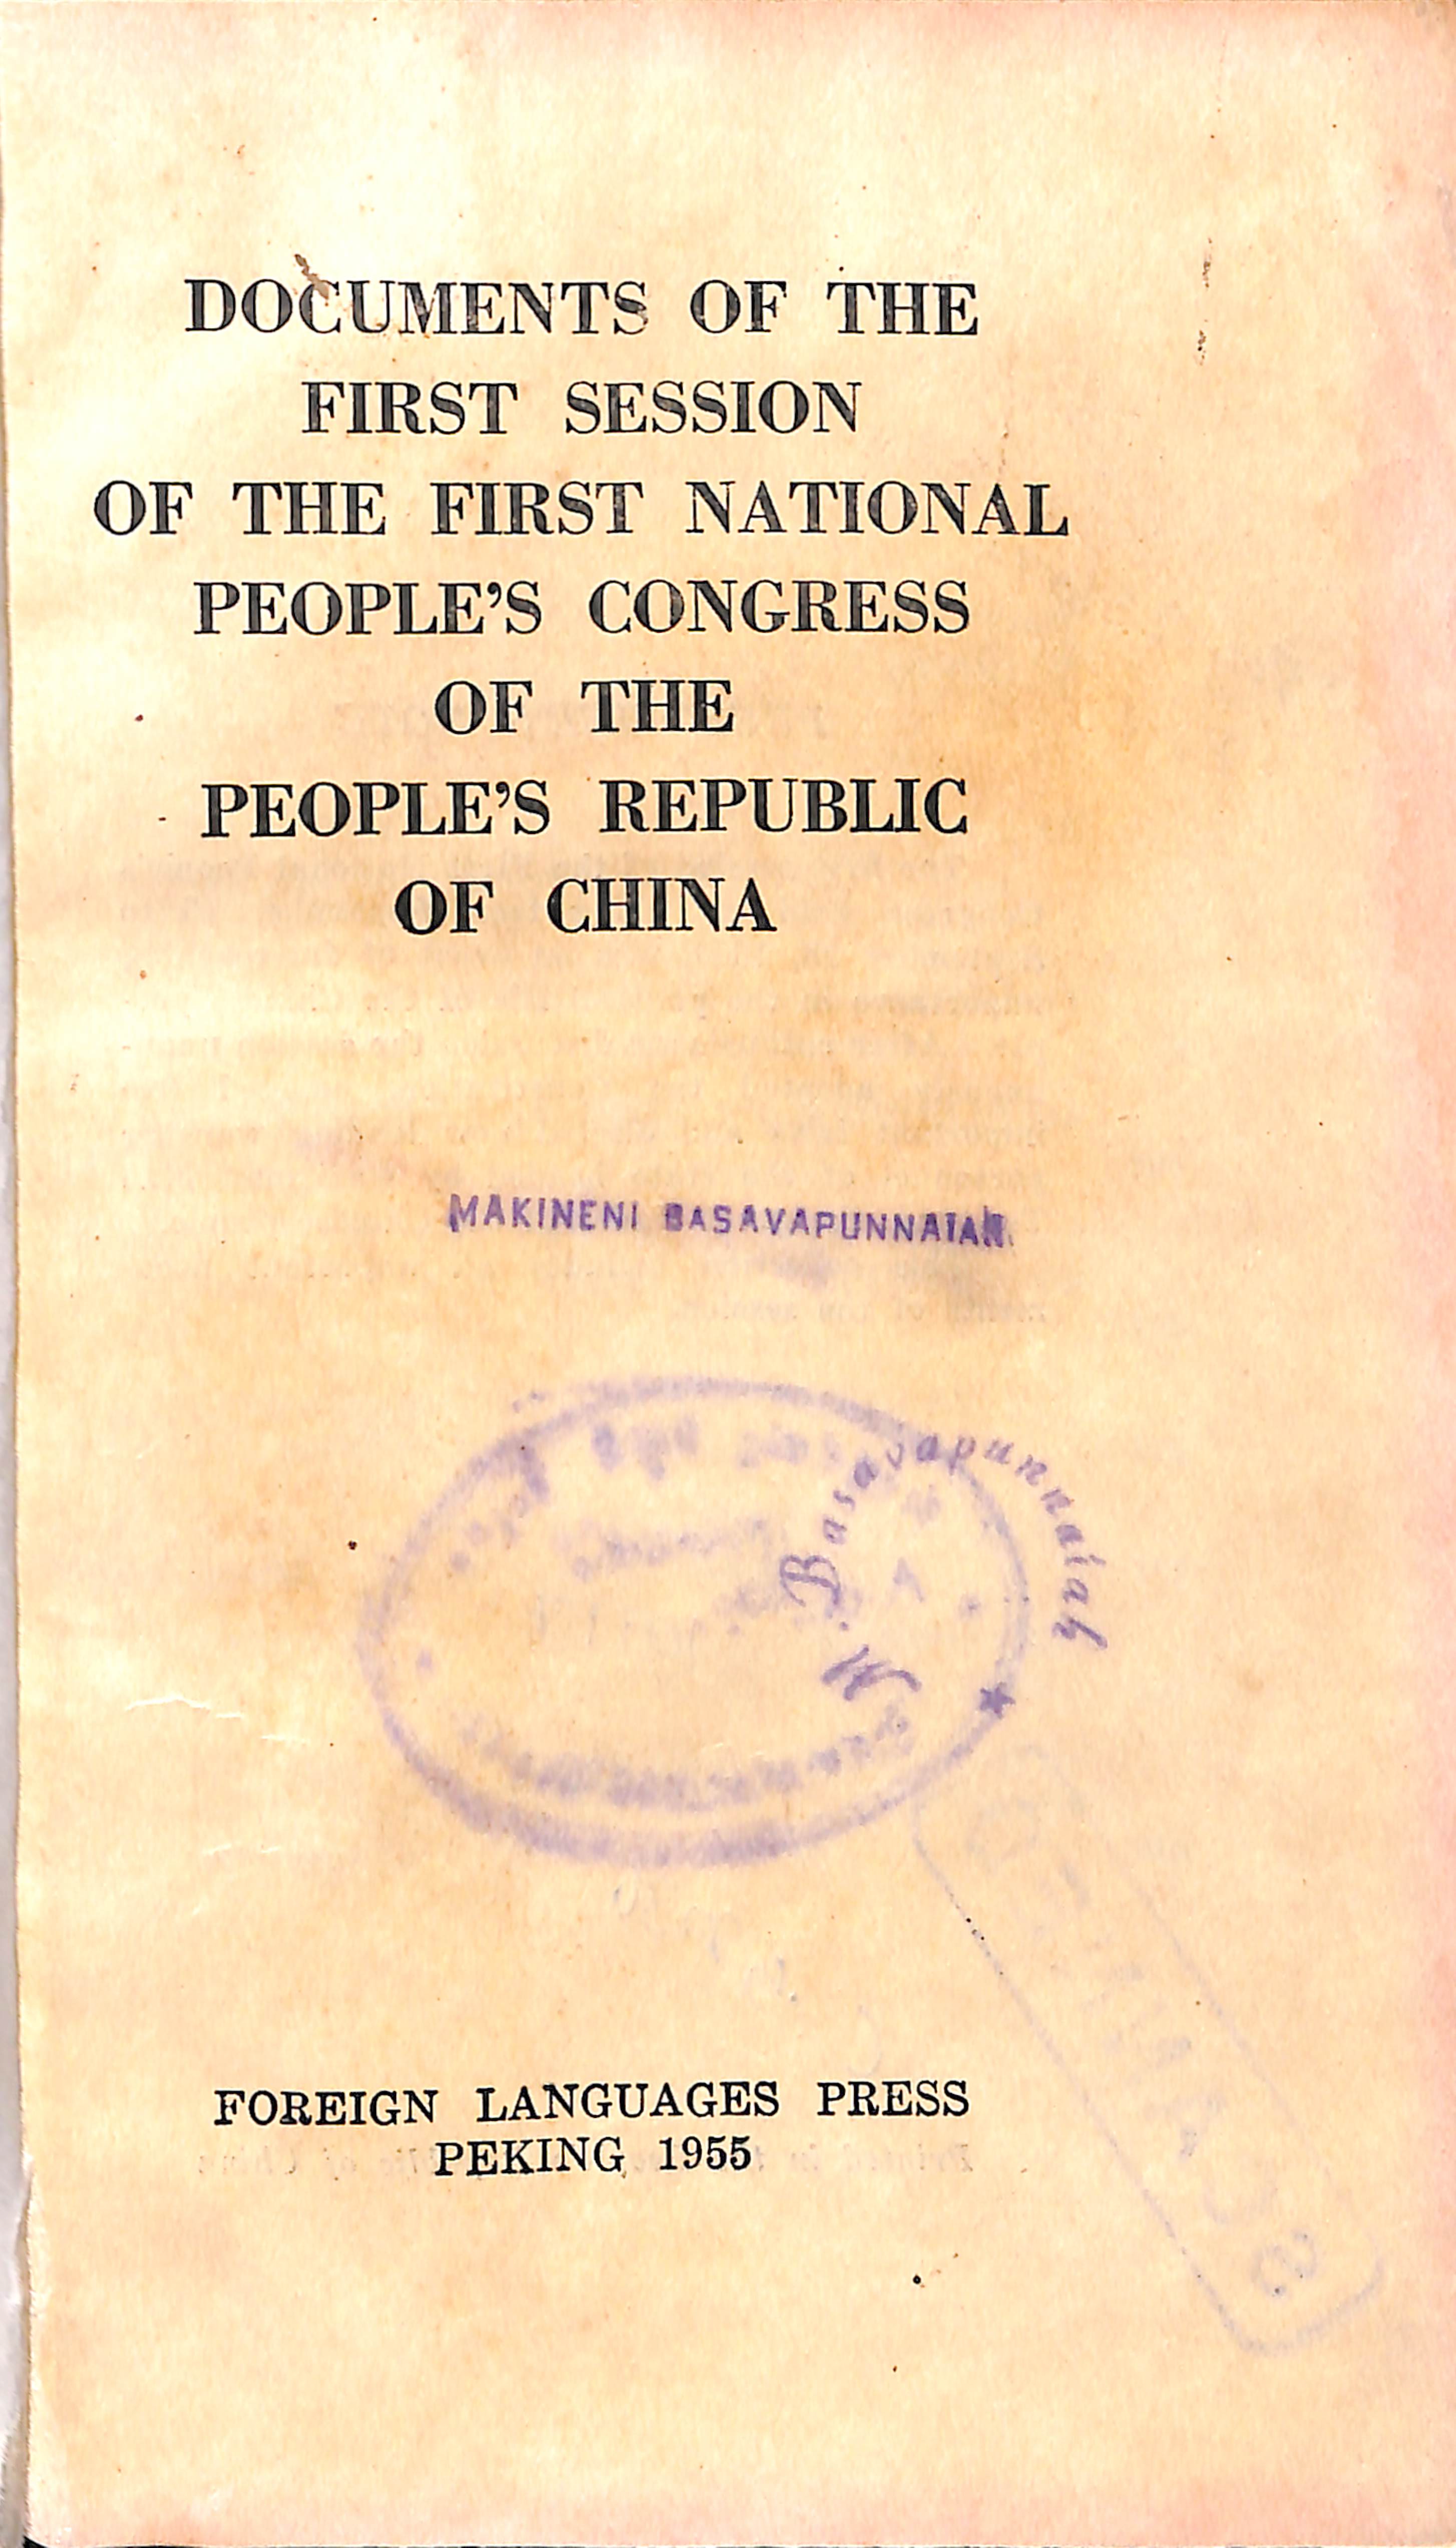 Documents of thrt first session of the first national people's congress of the people's republic of china